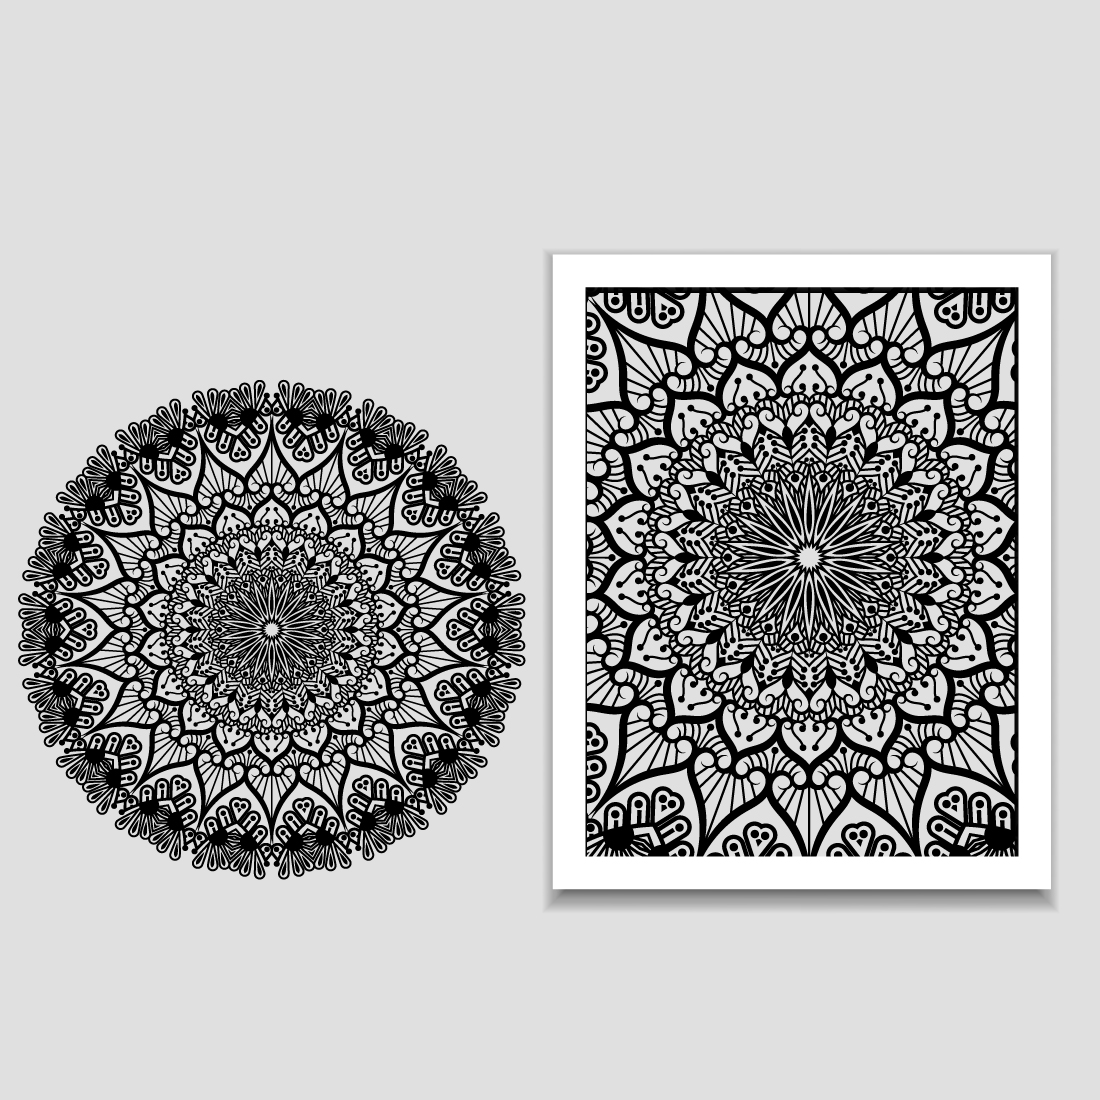 Black and white drawing of a circular design.